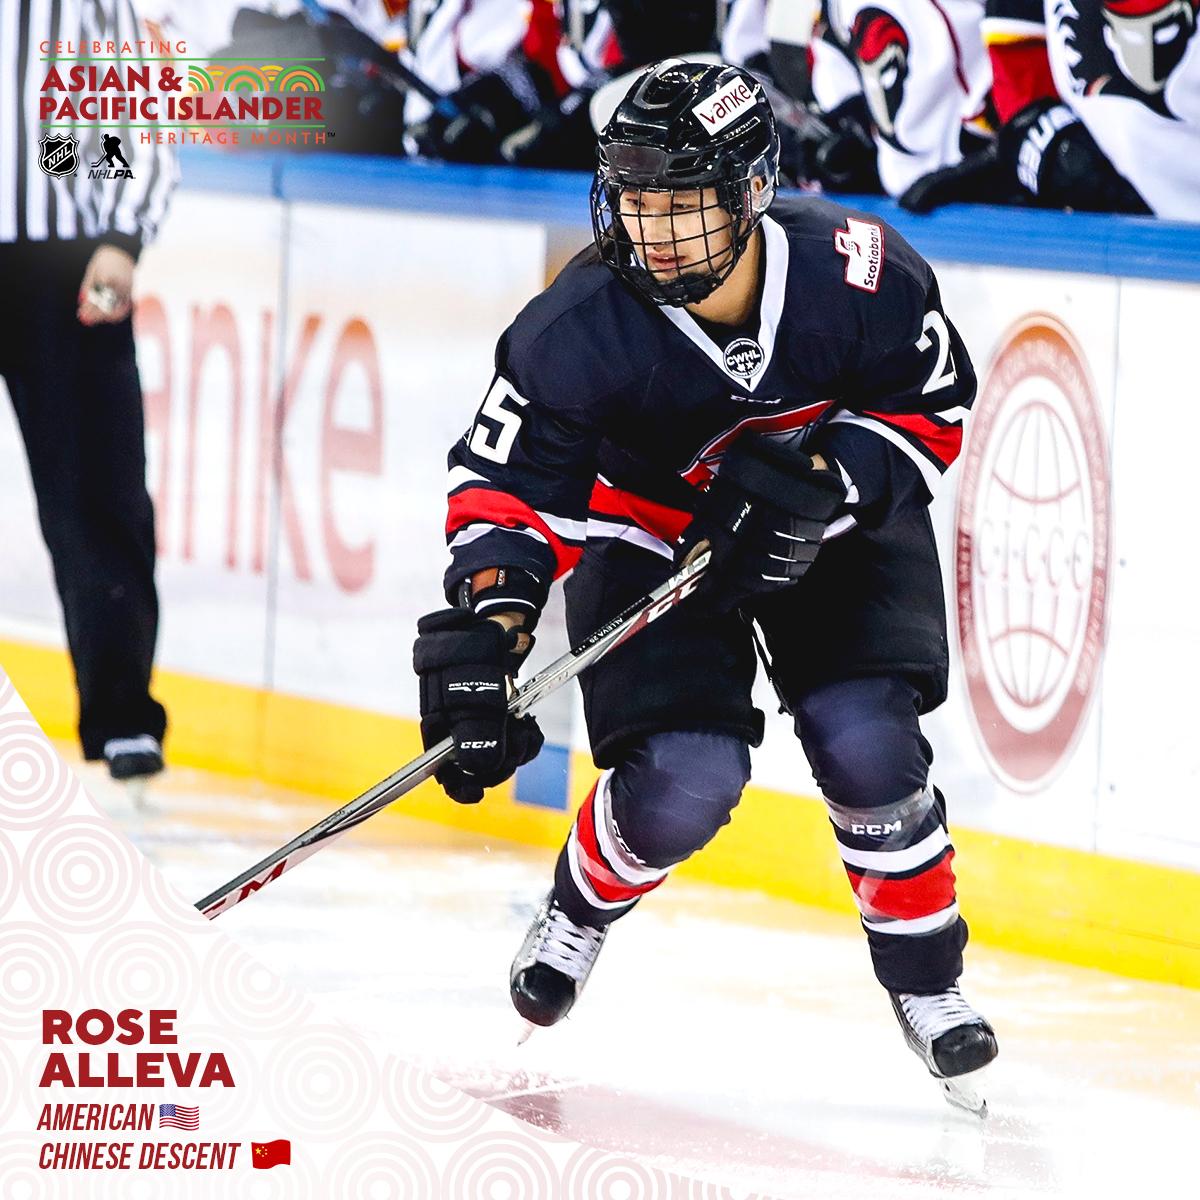 Born in China and raised in Minnesota, Rose Alleva has played for Princeton University, the Vanke Rays in the CWHL and is currently playing in the NWHL for the Minnesota Whitecaps. #NHLAPIHeritage | #HockeyIsForEveryone